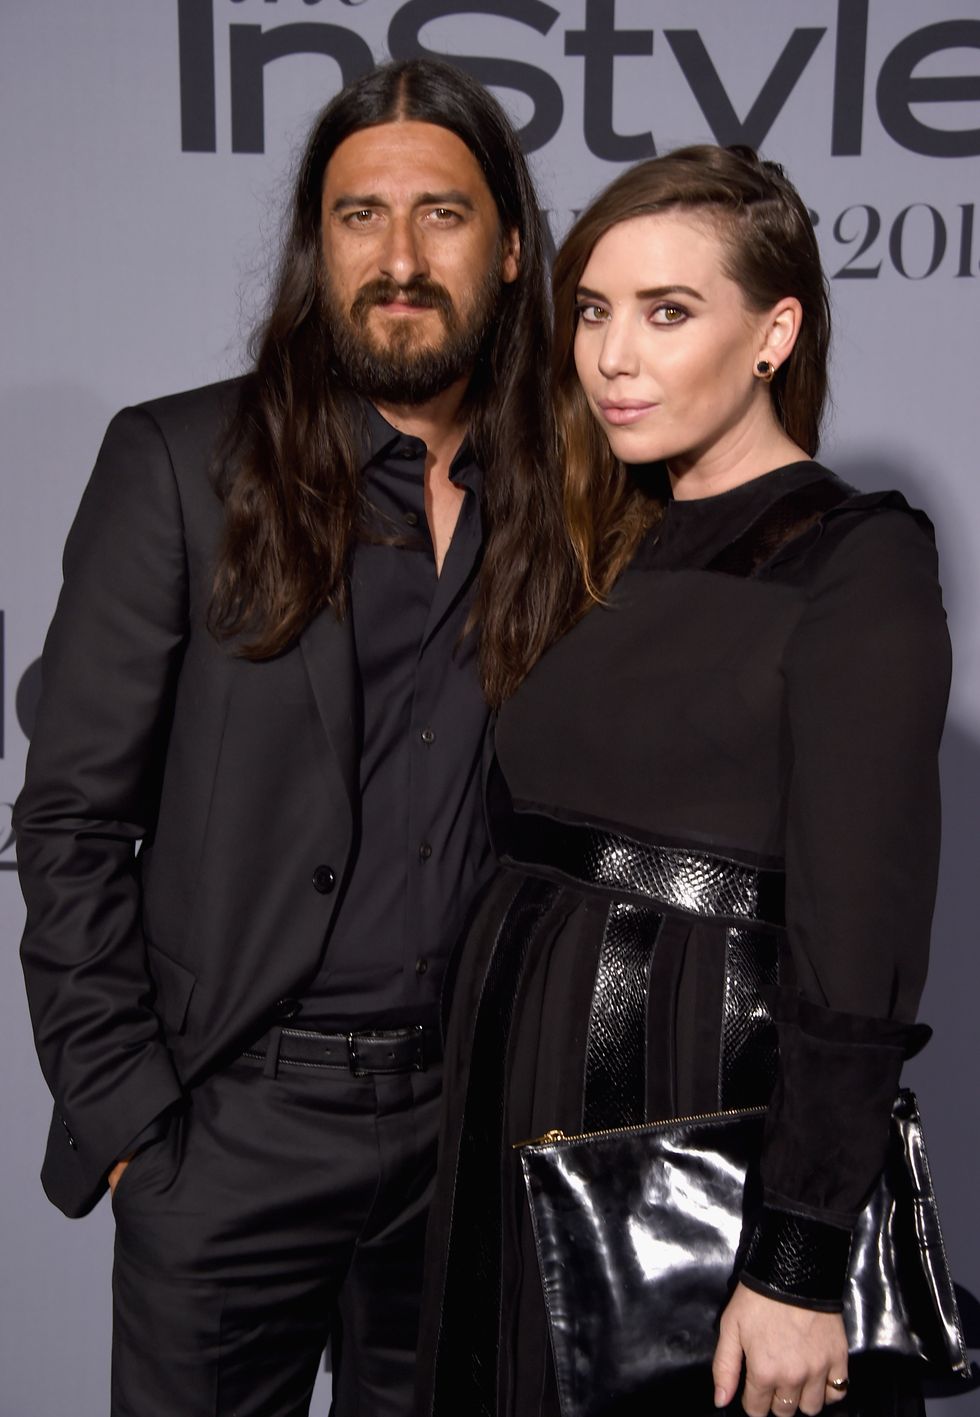 los angeles, ca   october 26  recording artist lykke li r and guest attend the instyle awards at getty center on october 26, 2015 in los angeles, california  photo by jason merrittgetty images for instyle